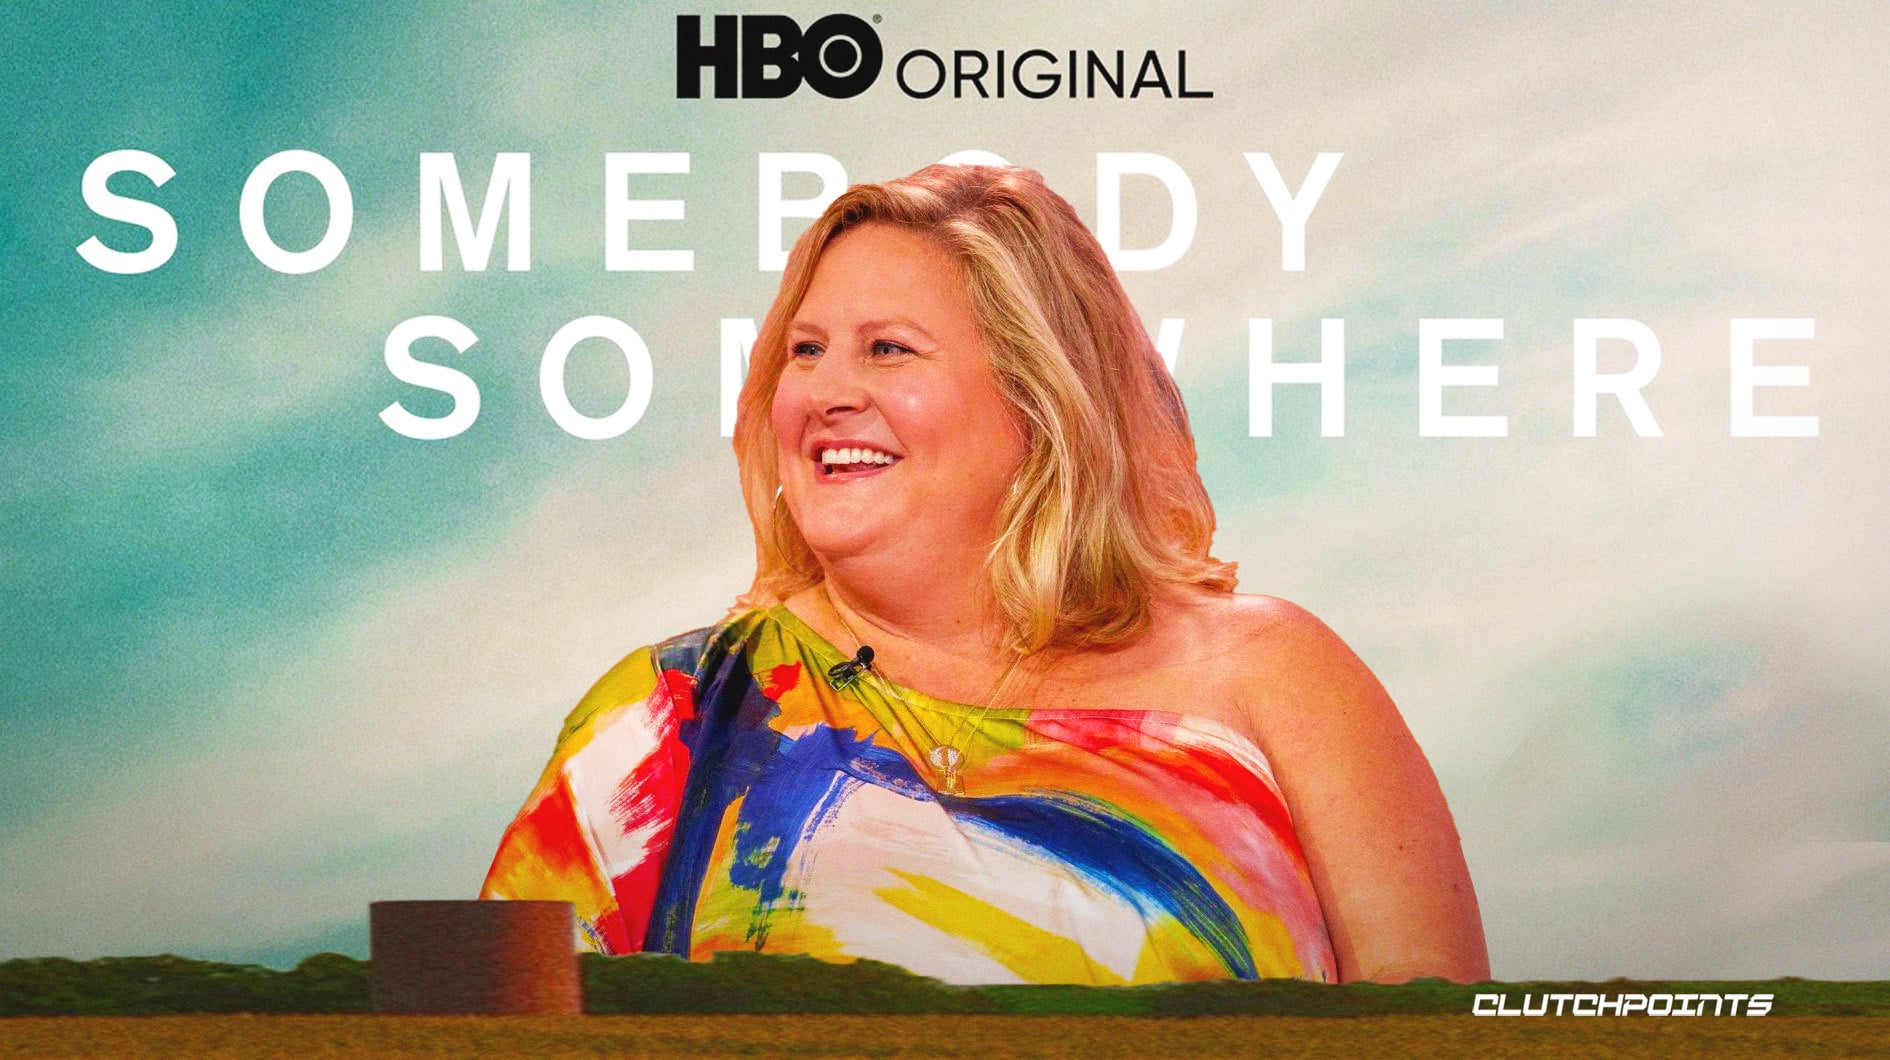 HBO's 'Somebody Somewhere' review: Bridget Everett sings with her